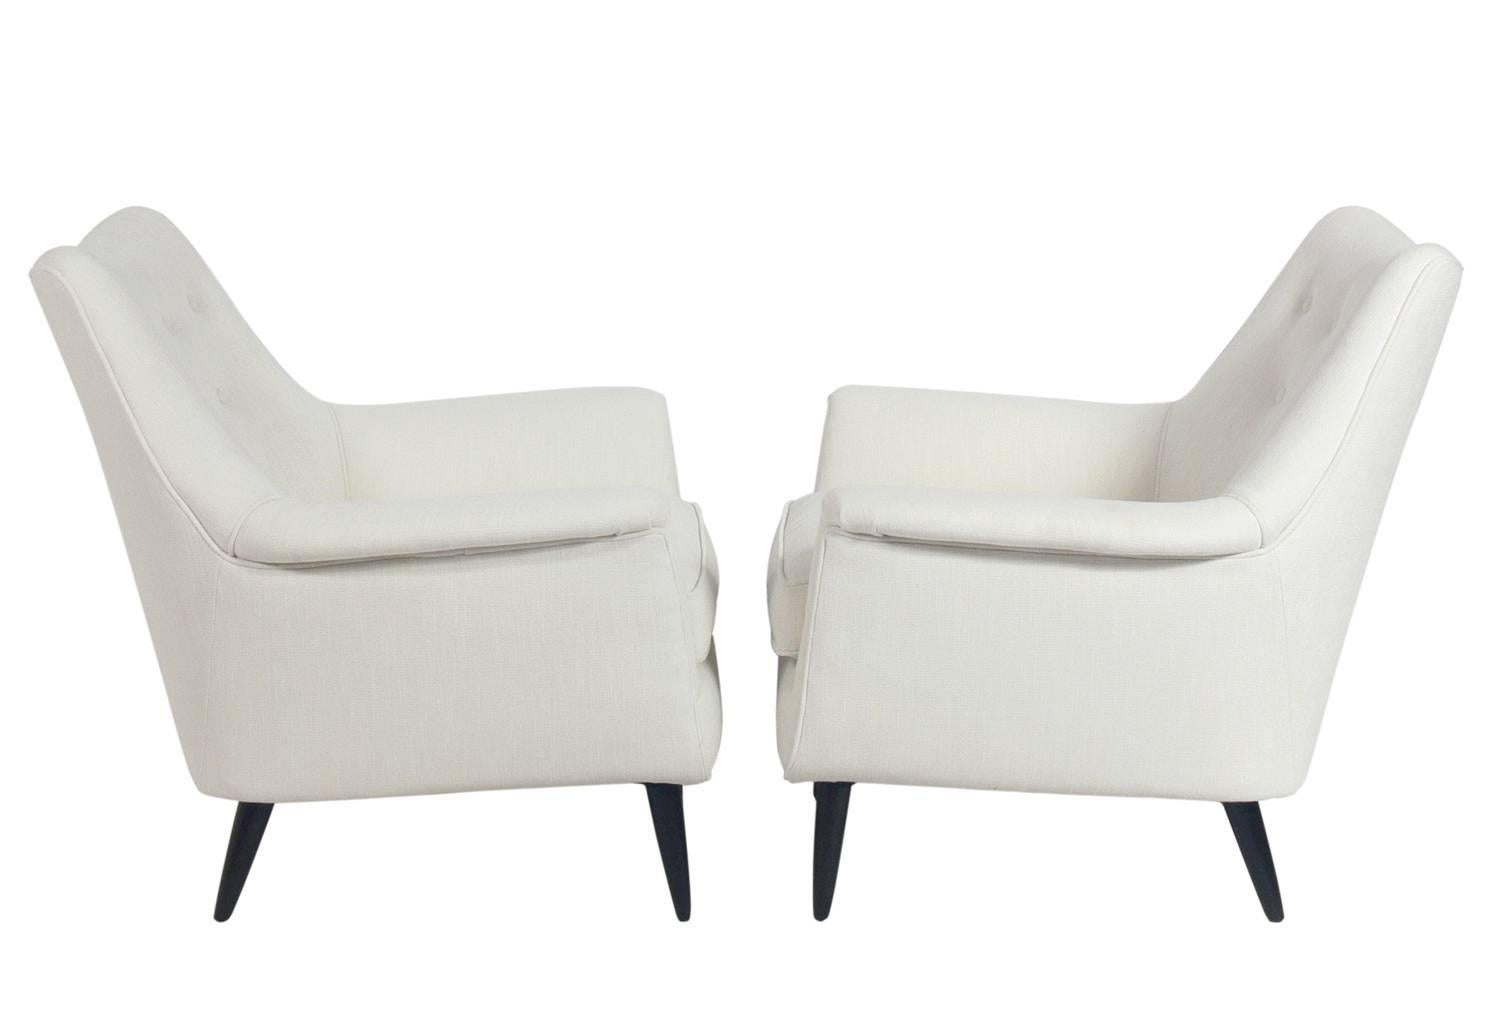 Pair of curvaceous Italian lounge chairs, Italy, circa 1950s. They have been completely restored in an ivory white color woven fabric with the wood legs refinished in an ultra-deep brown lacquer. The price noted below is for the pair of chairs.